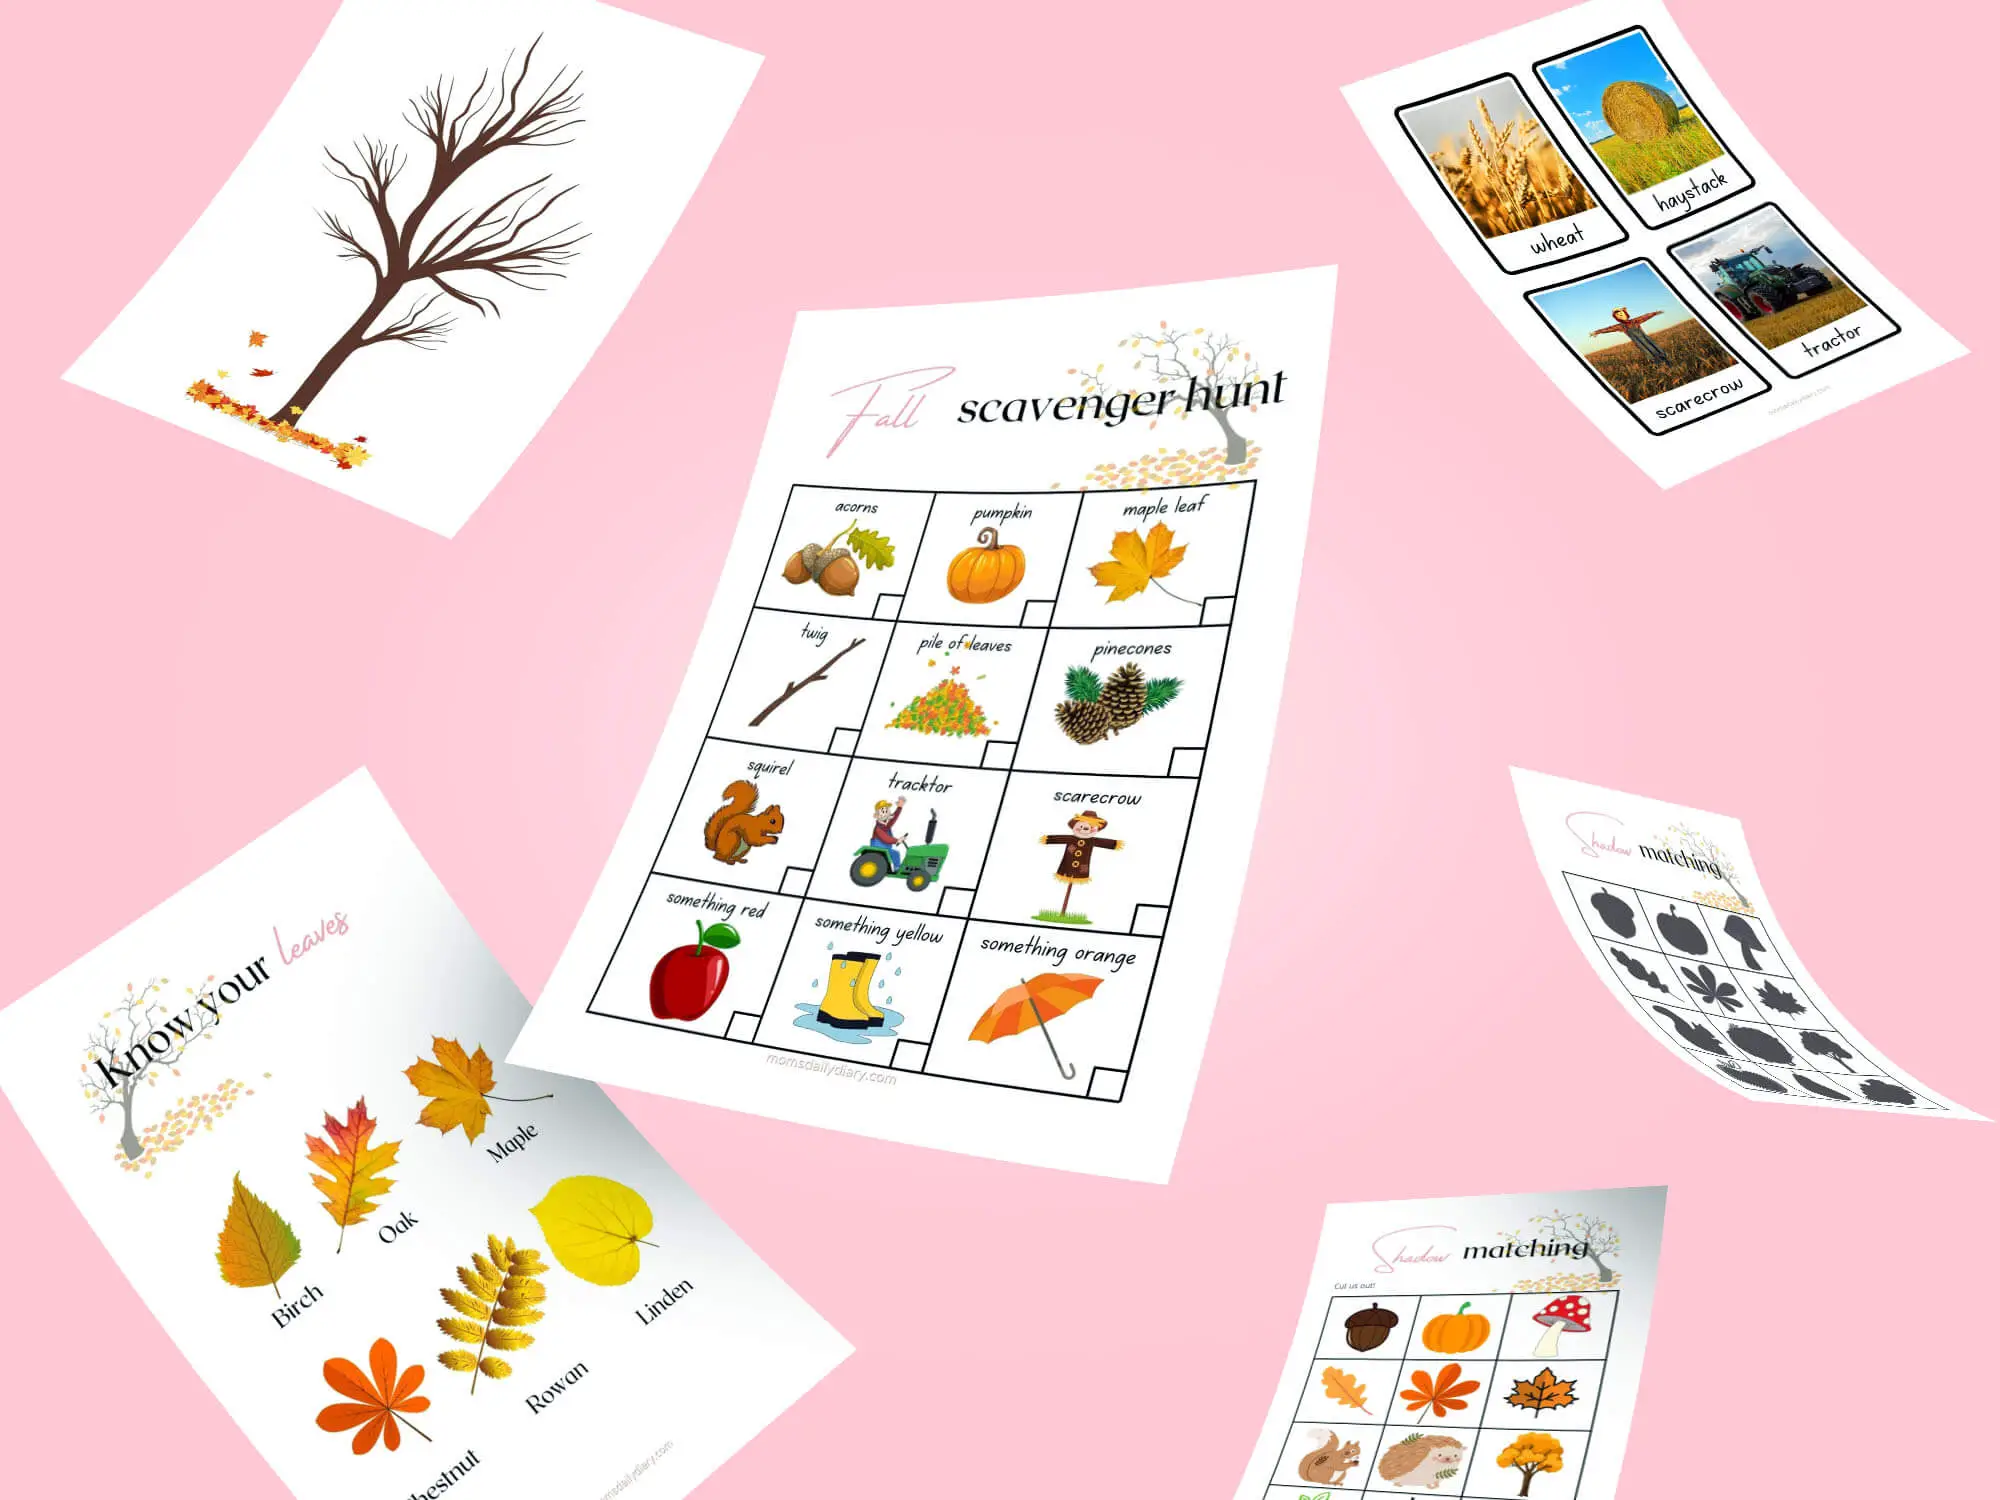 Promotional image of flying pages from the Fall Activities for Toddlers workbook available for free on Mom's Daily Diary.